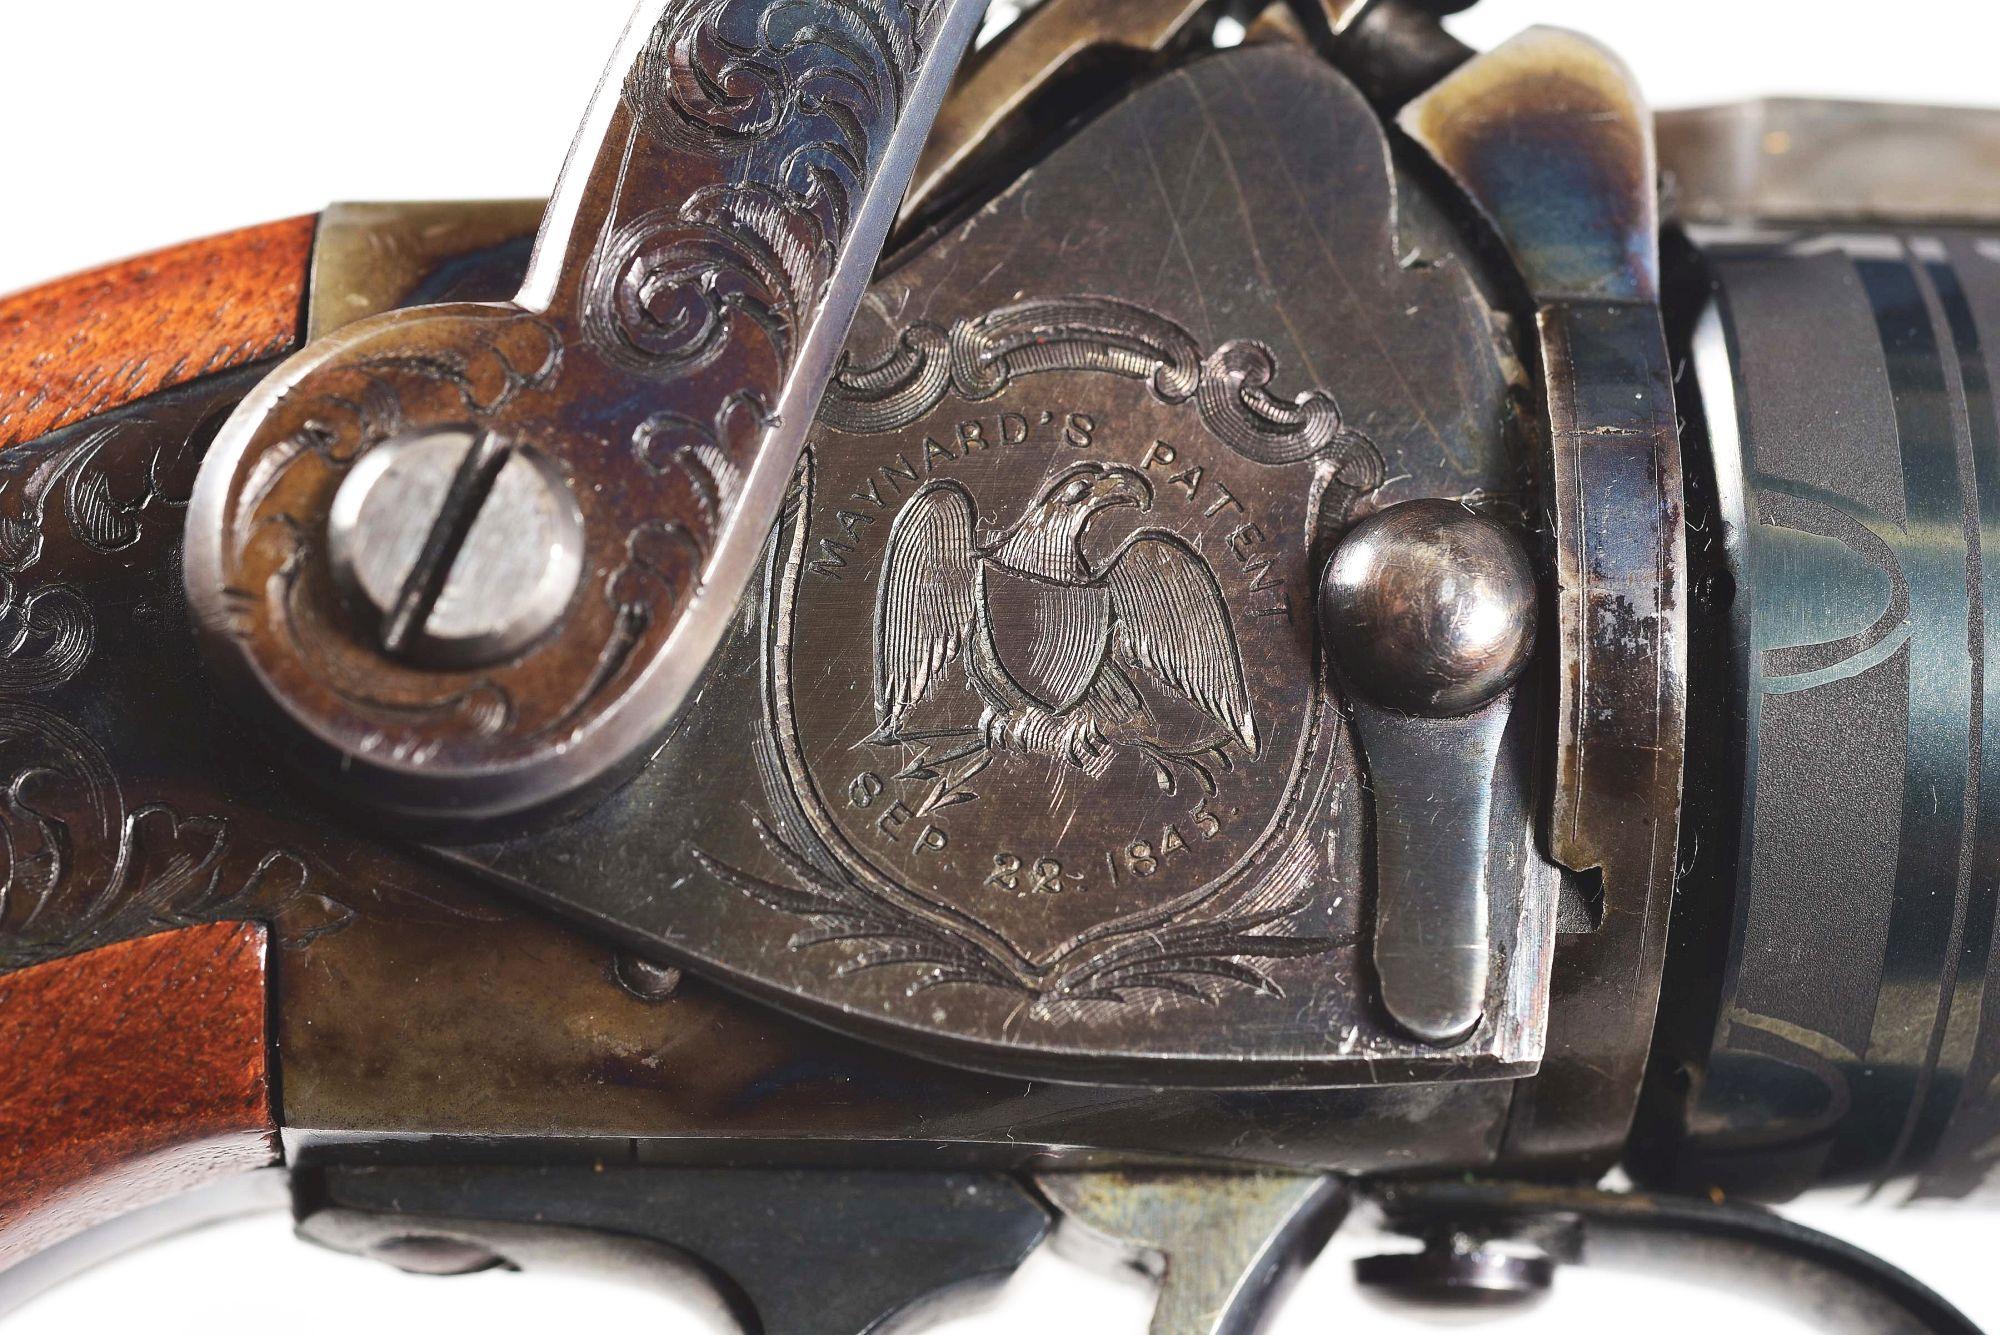 (A) EXTREMELY FINE MASSACHUSETTS ARMS COMPANY MAYNARD PERCUSSION BELT REVOLVER IN CASE WITH ACCOUTRE